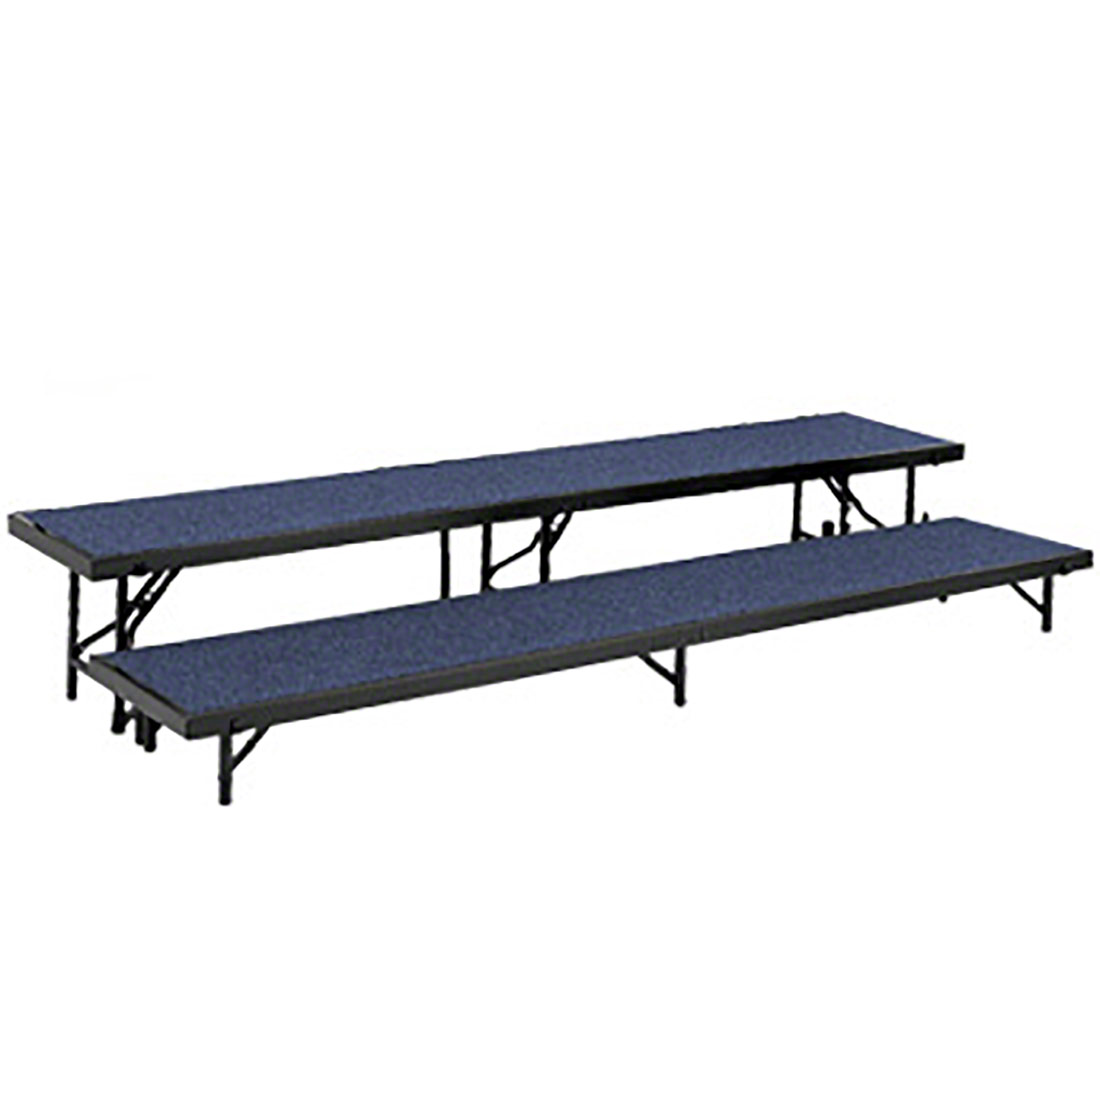 Rt2lc-04 2 Level Tapered Standing Choral Riser, Blue Carpet - 18 X 96 In. Platform